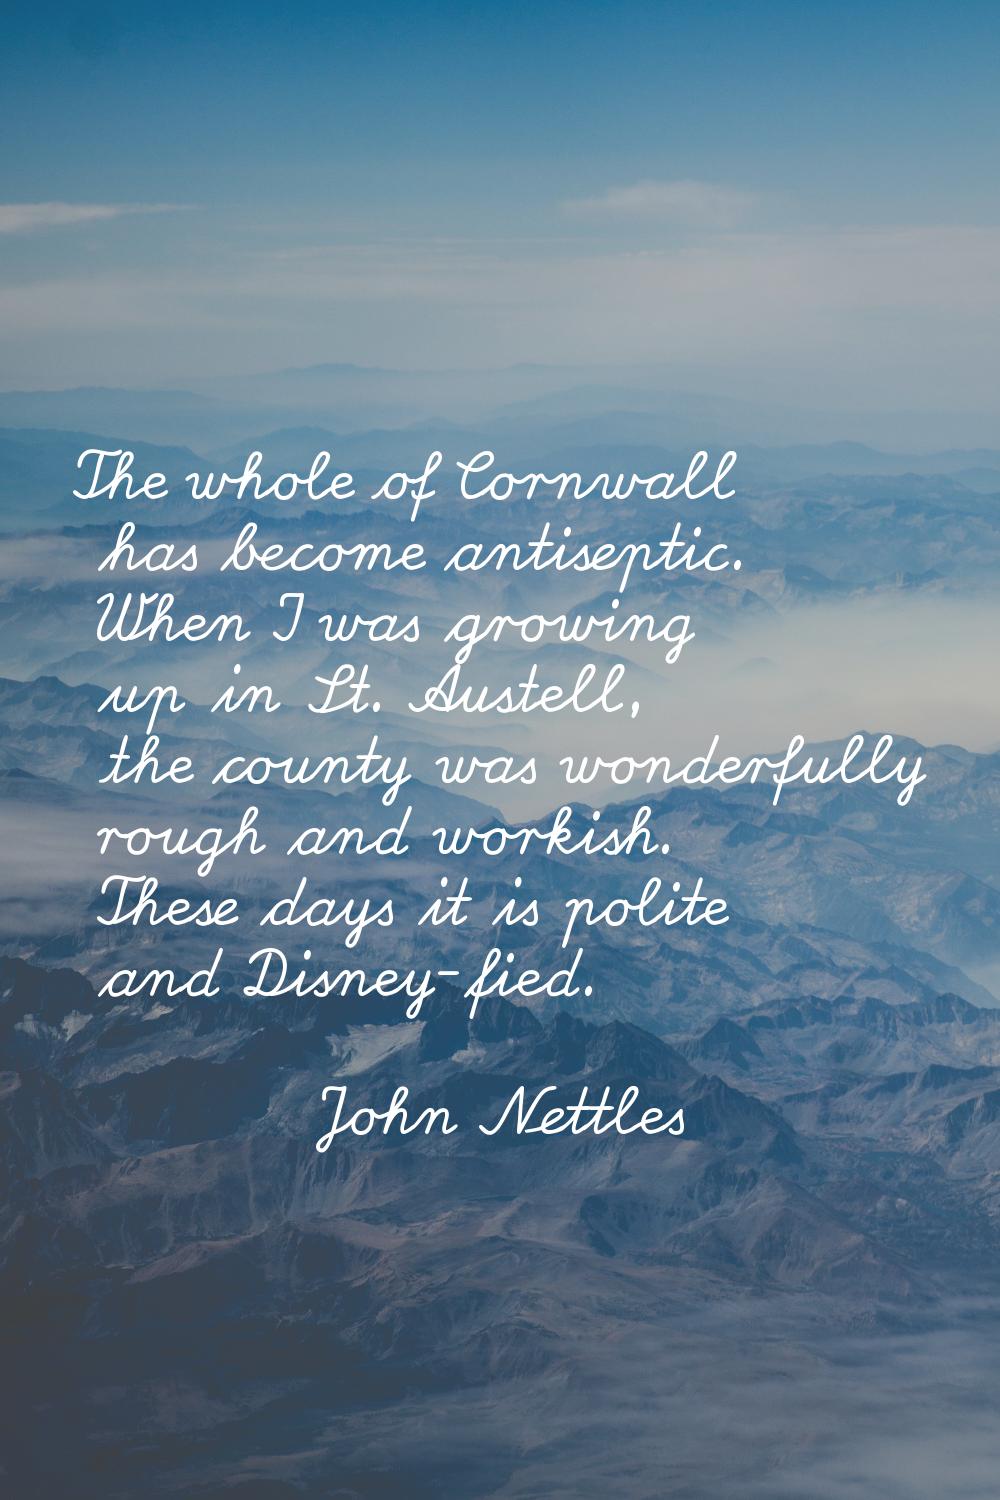 The whole of Cornwall has become antiseptic. When I was growing up in St. Austell, the county was w